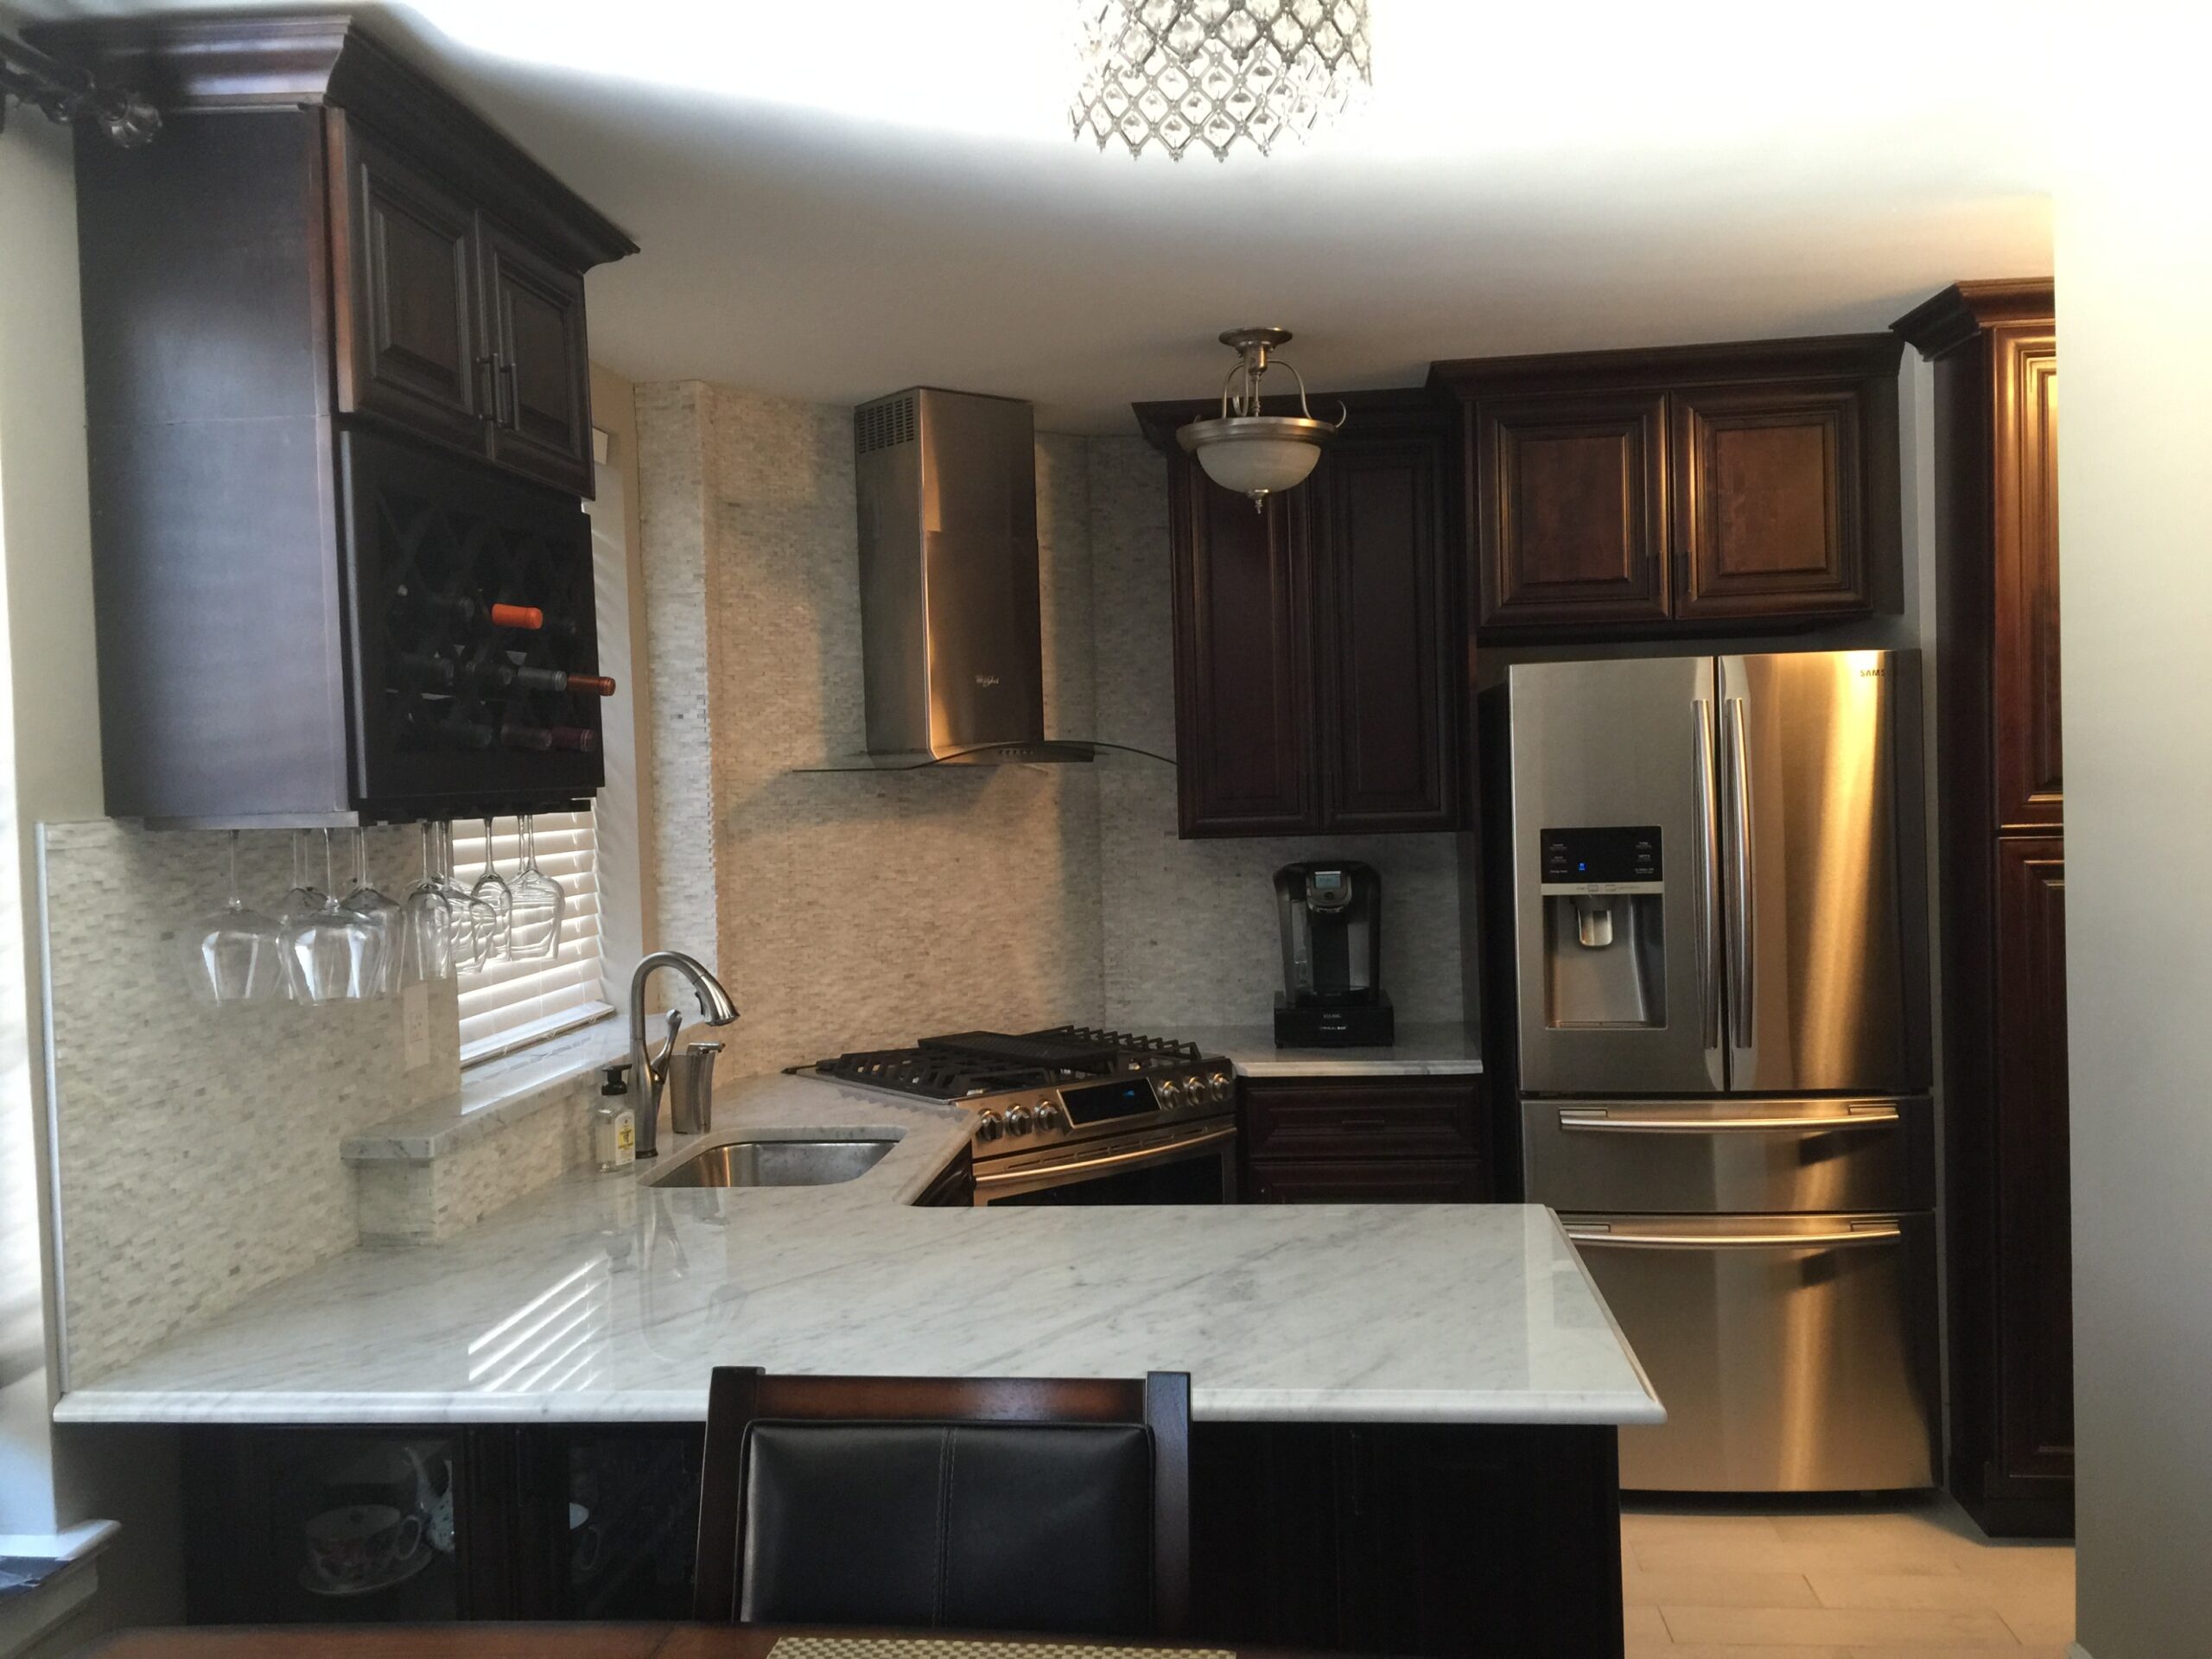 Kitchen Cabinets Queens NY [ Top Quality & Offer ] - kitchen cabinets in queens